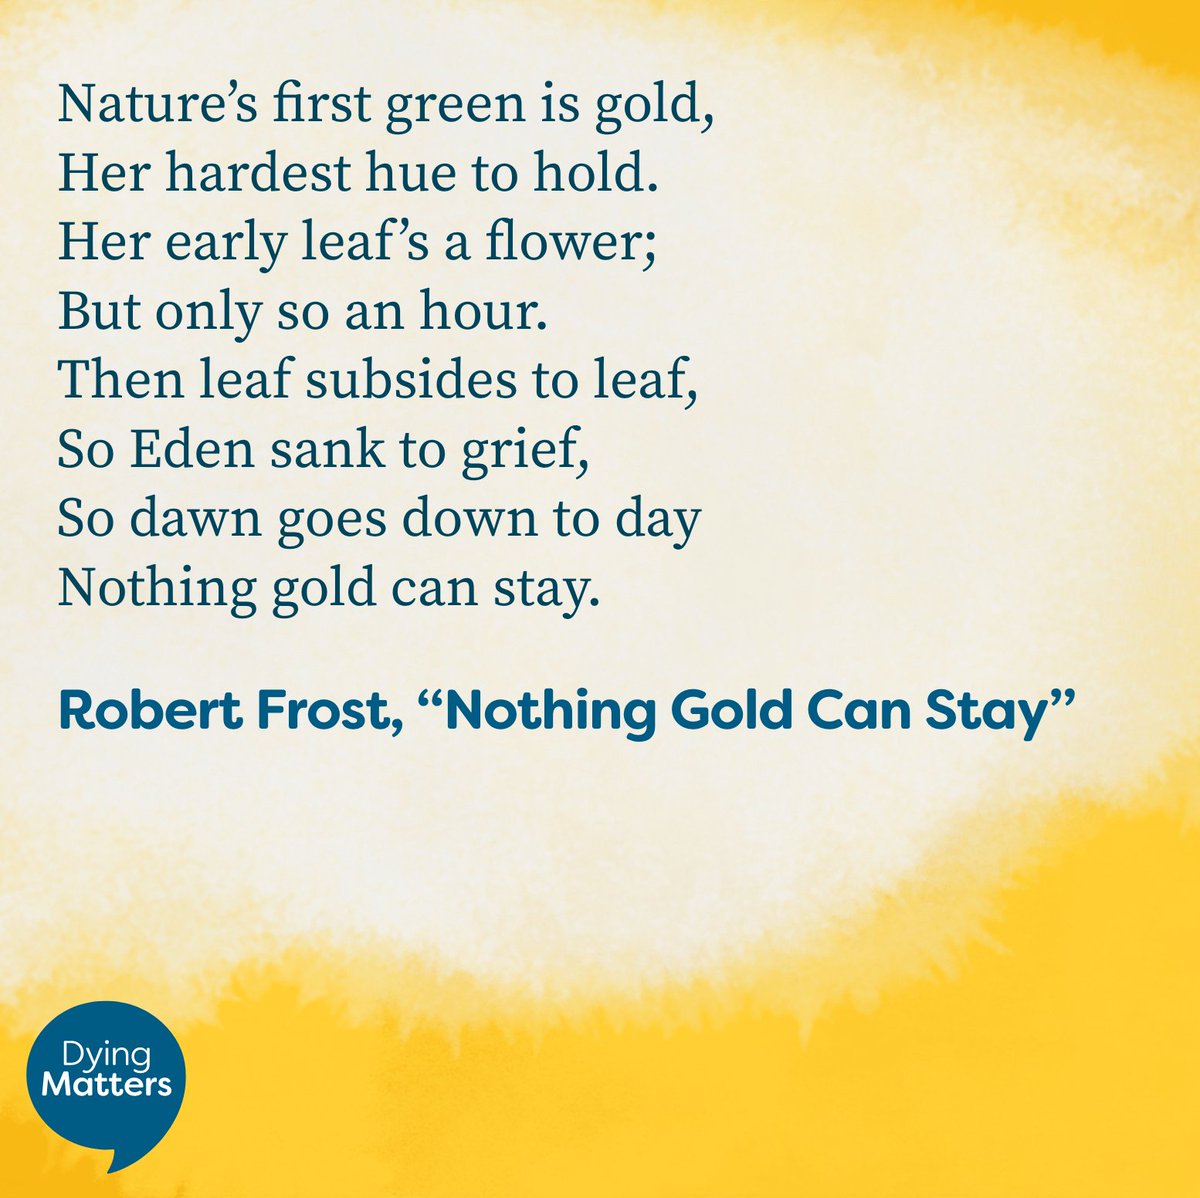 Our #GriefWords this week, a poem by Robert Frost 💛